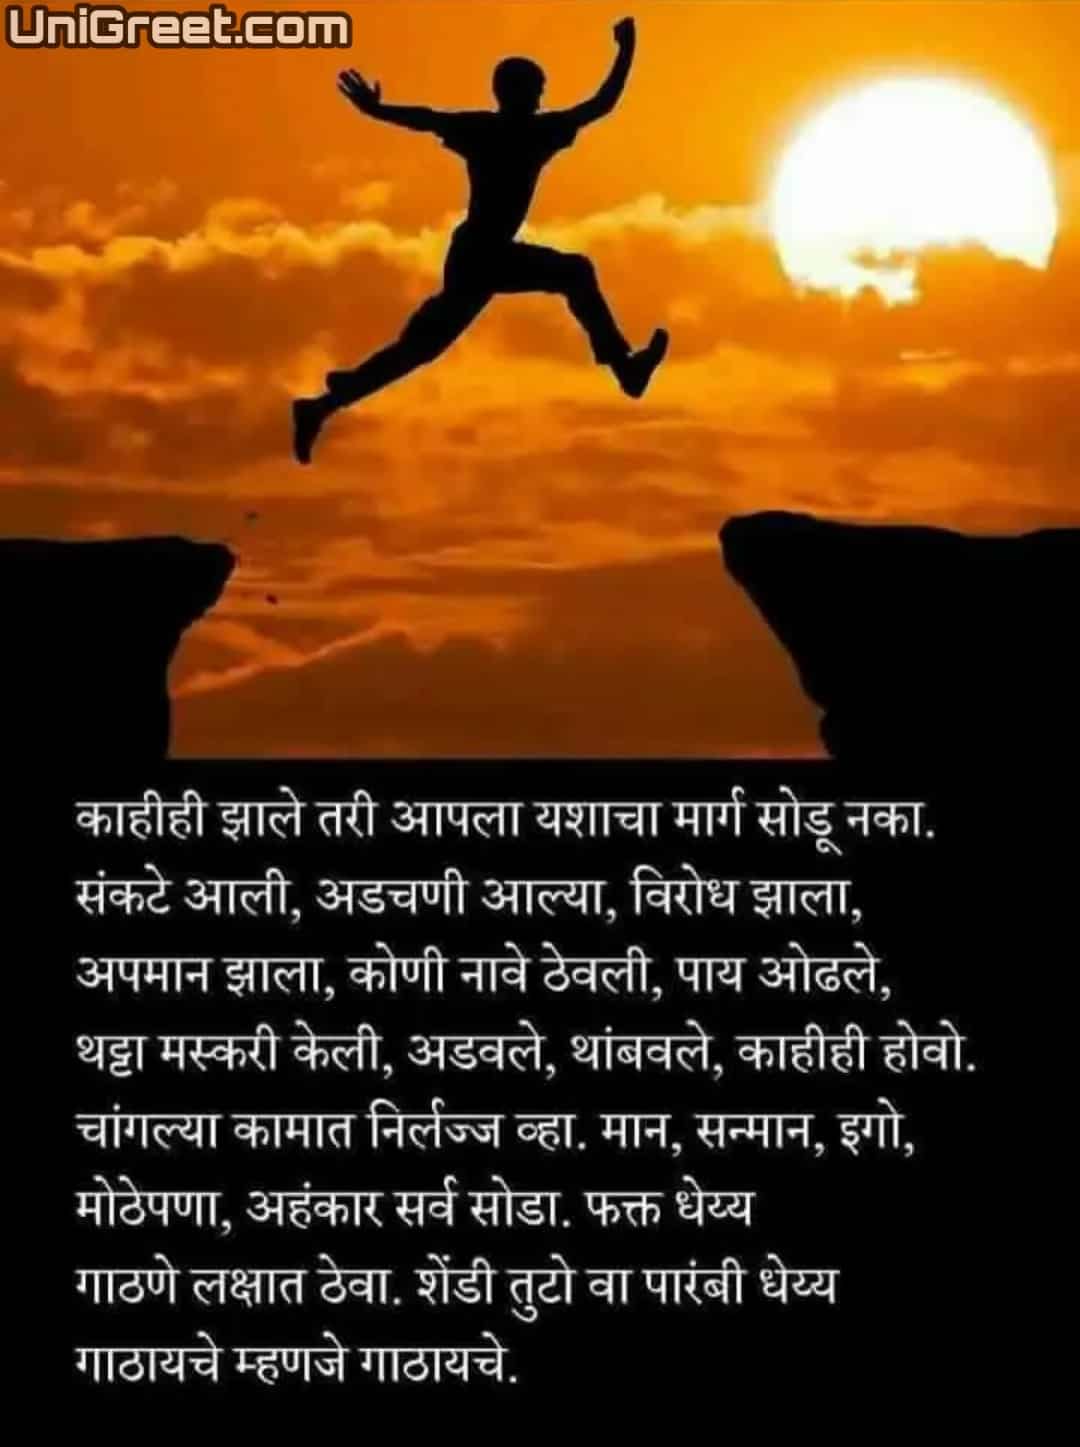 Extensive Collection of Over 999+ Inspiring Marathi Images – Spectacular Assortment of Motivational Images in Marathi with Ultra HD 4K Quality